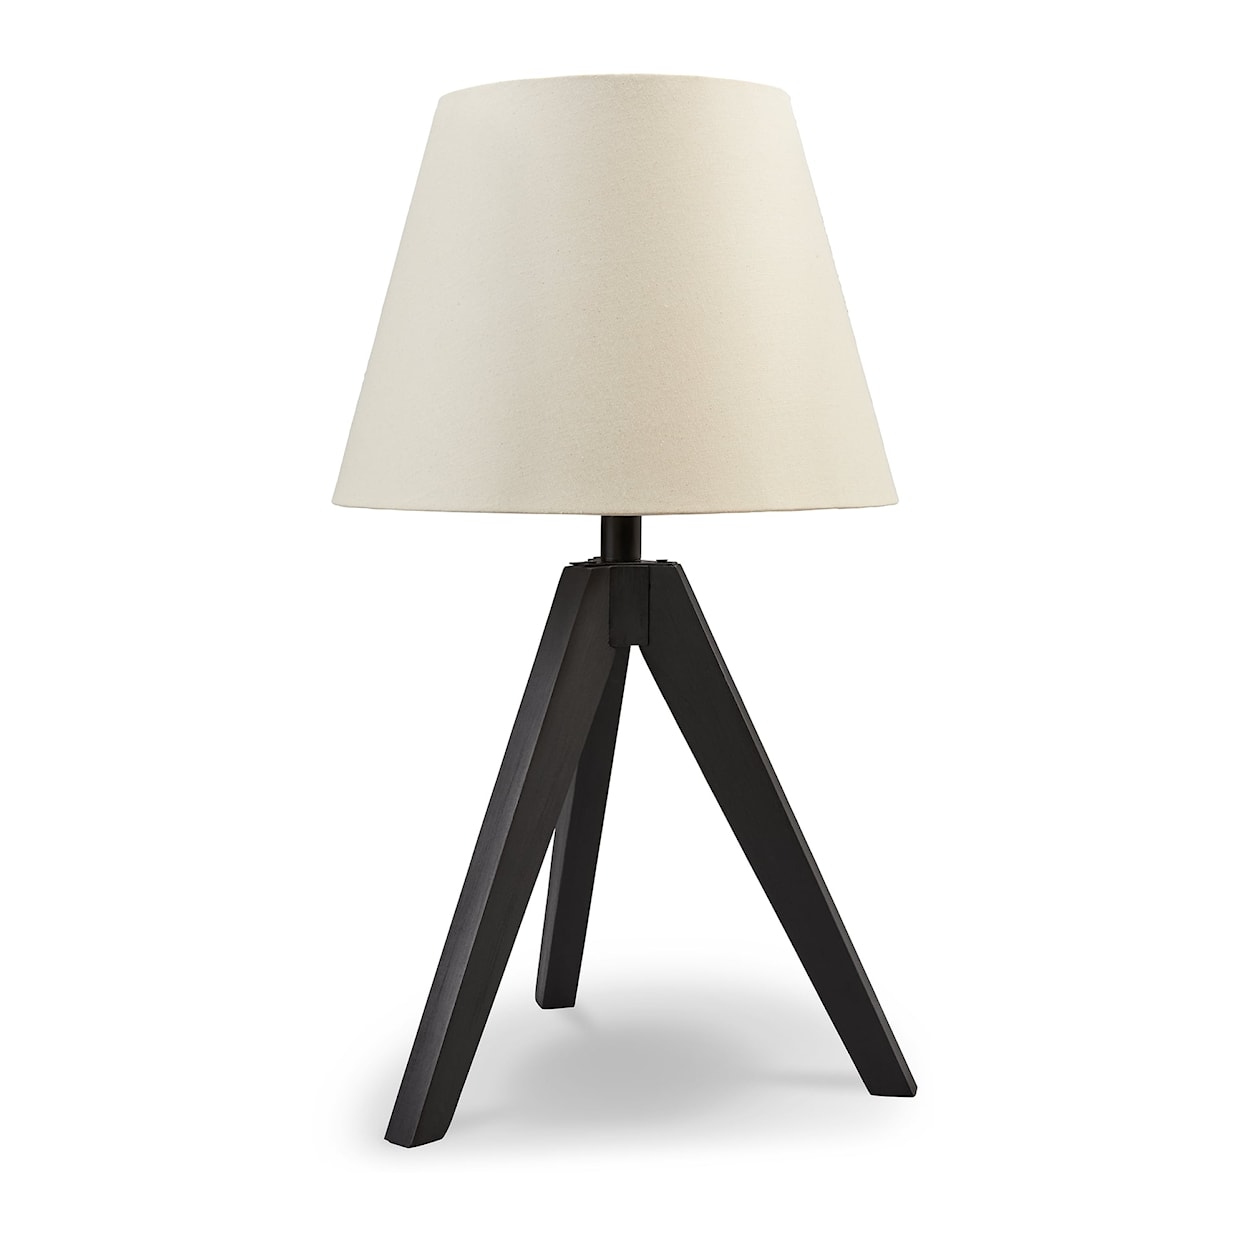 Signature Design Laifland Wood Table Lamp (Set of 2)